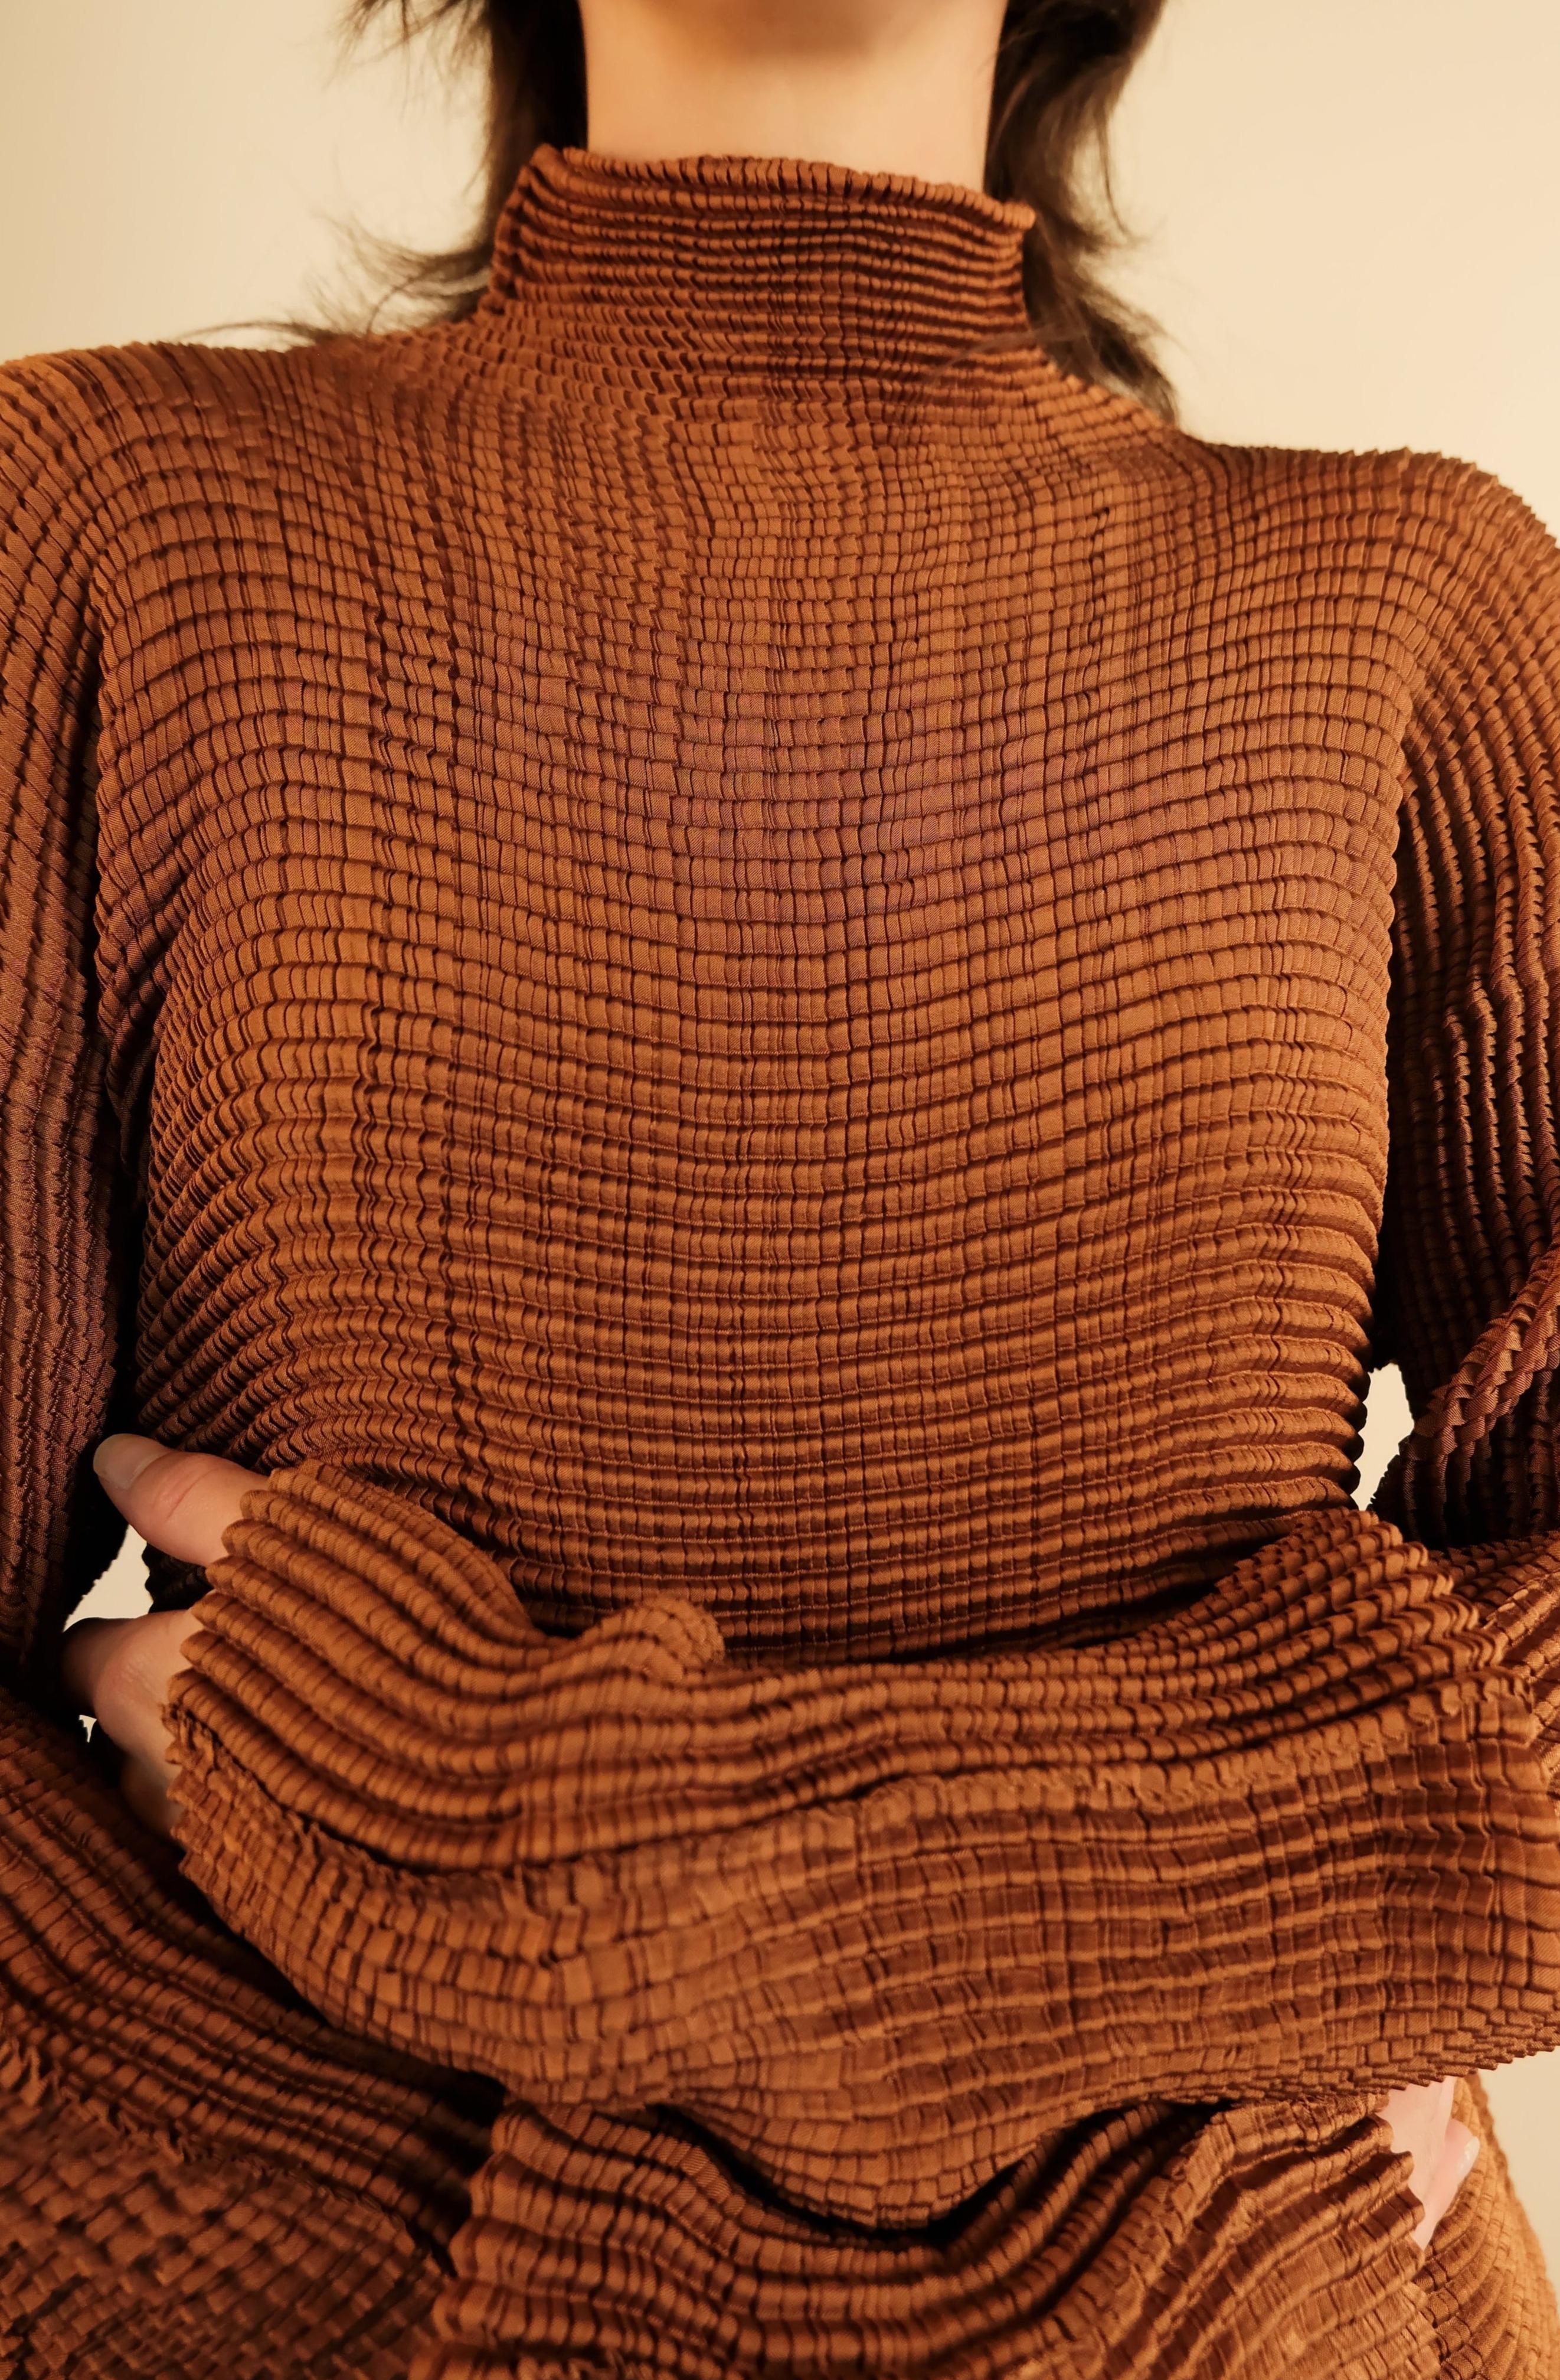 ISSEY MIYAKE Pleated Copper Turtleneck Tunic In Good Condition For Sale In Morongo Valley, CA